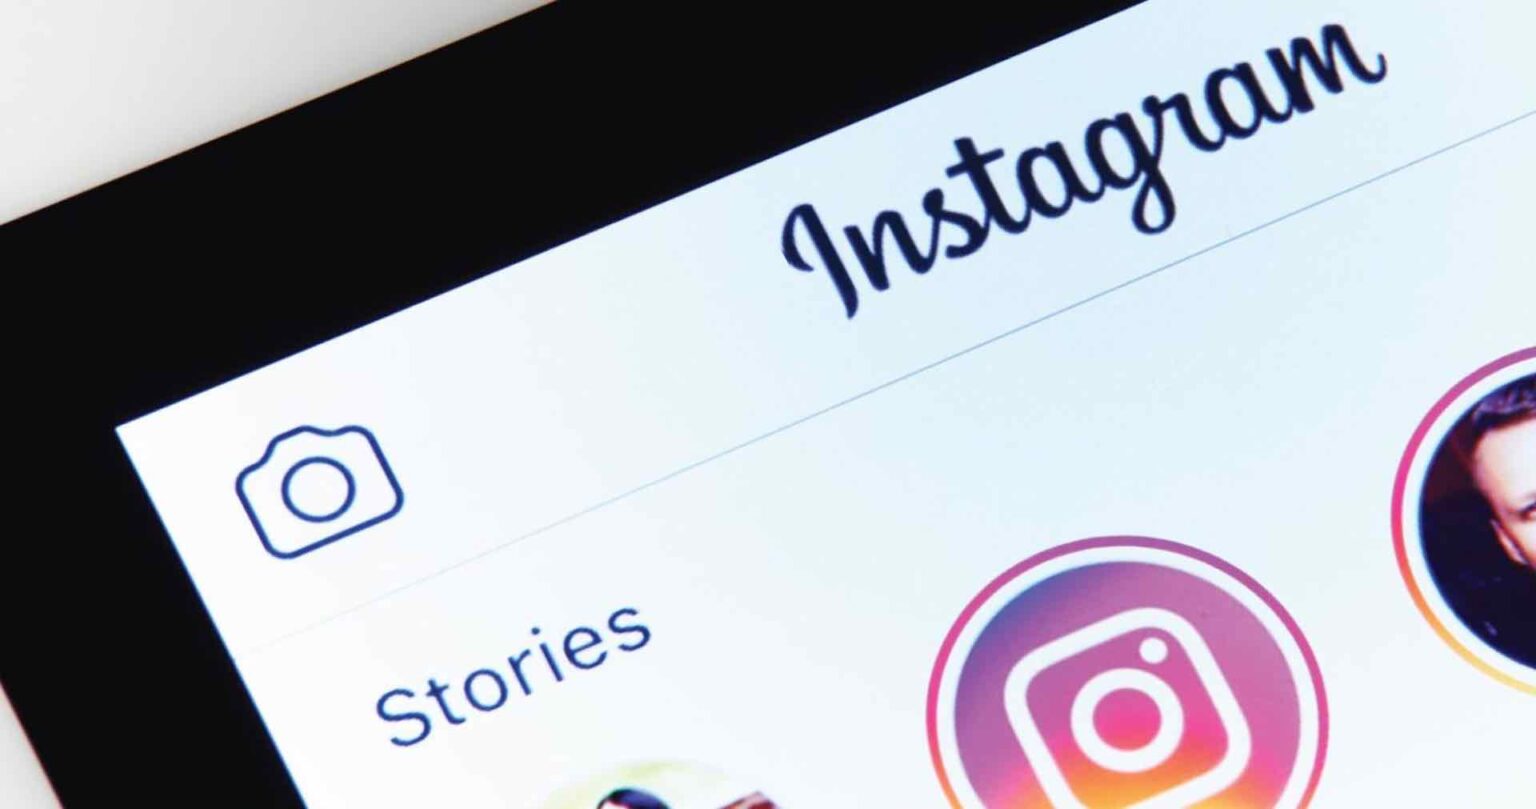 Instagram may be using filters to collect facial recognition information without user consent. Here's everything we know about the lawsuit so far.